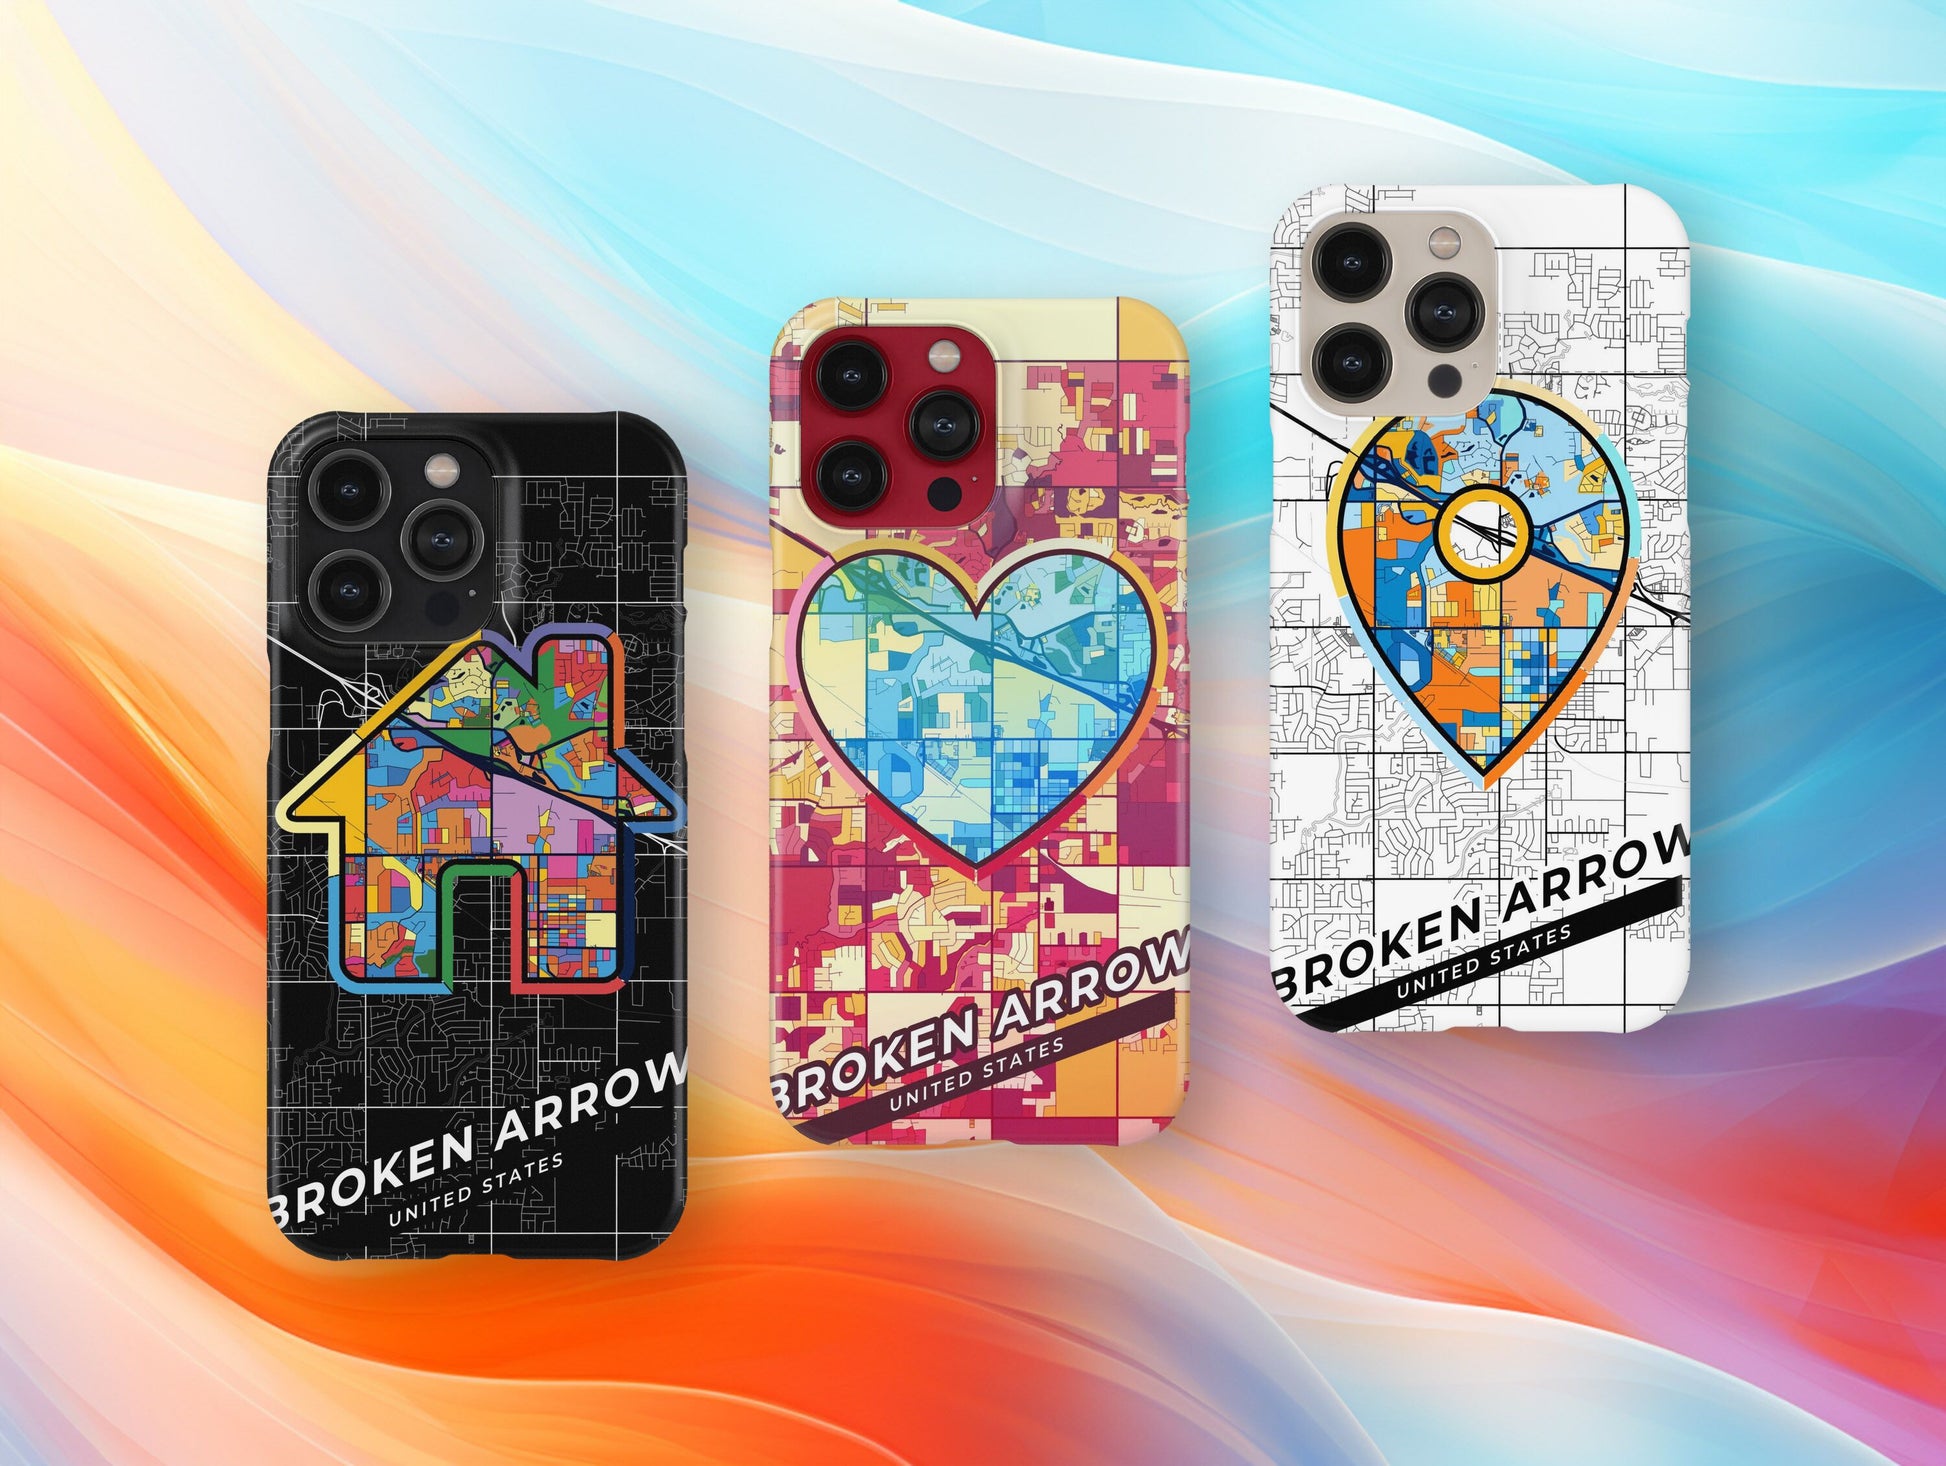 Broken Arrow Oklahoma slim phone case with colorful icon. Birthday, wedding or housewarming gift. Couple match cases.